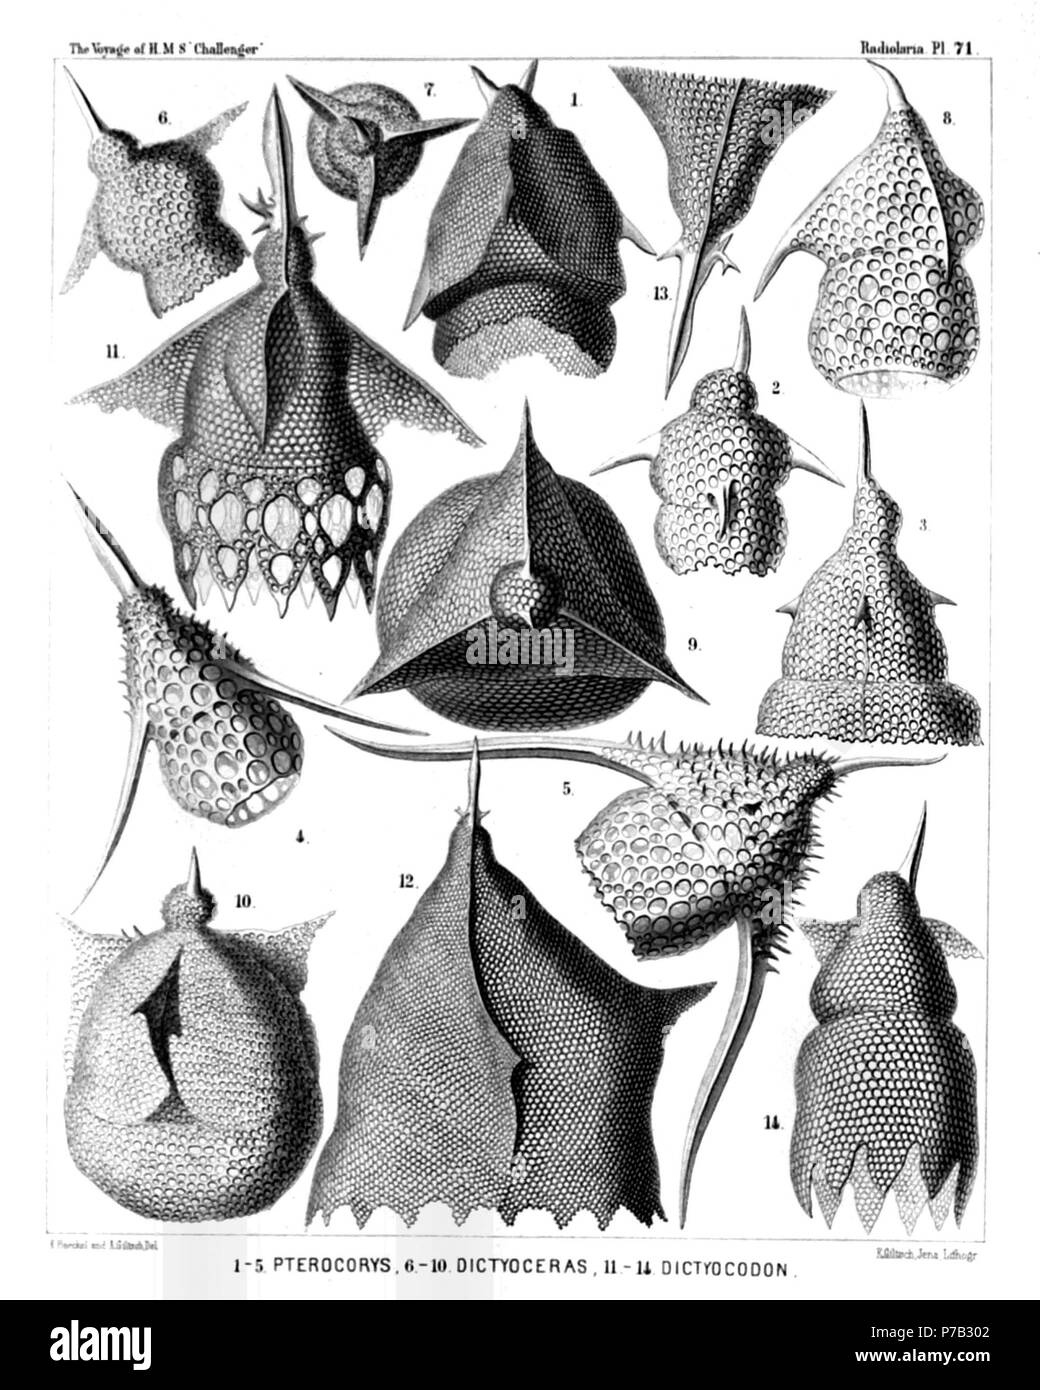 English: Illustration from Report on the Radiolaria collected by H.M.S. Challenger during the years 1873-1876. Part III. Original description follows:  Plate 71. Podocyrtida.  Diam.  Fig. 1. Pterocorys rhinoceros, n. sp., × 400  Fig. 2. Pterocorys columba, n. sp., × 400  Fig. 3. Pterocorys campanula, n. sp., × 400  Fig. 4. Pterocorys hirundo, n. sp., × 300  Fig. 5. Pterocorys aquila, n. sp., × 300  Fig. 6. Dictyoceras insectum, n. sp., × 400  Fig. 7. Dictyoceras insectum, n. sp., × 400  Seen from the apex.  Fig. 8. Dictyoceras formica, n. sp., × 400  Fig. 9. Dictyoceras melitta, n. sp., × 400  Stock Photo